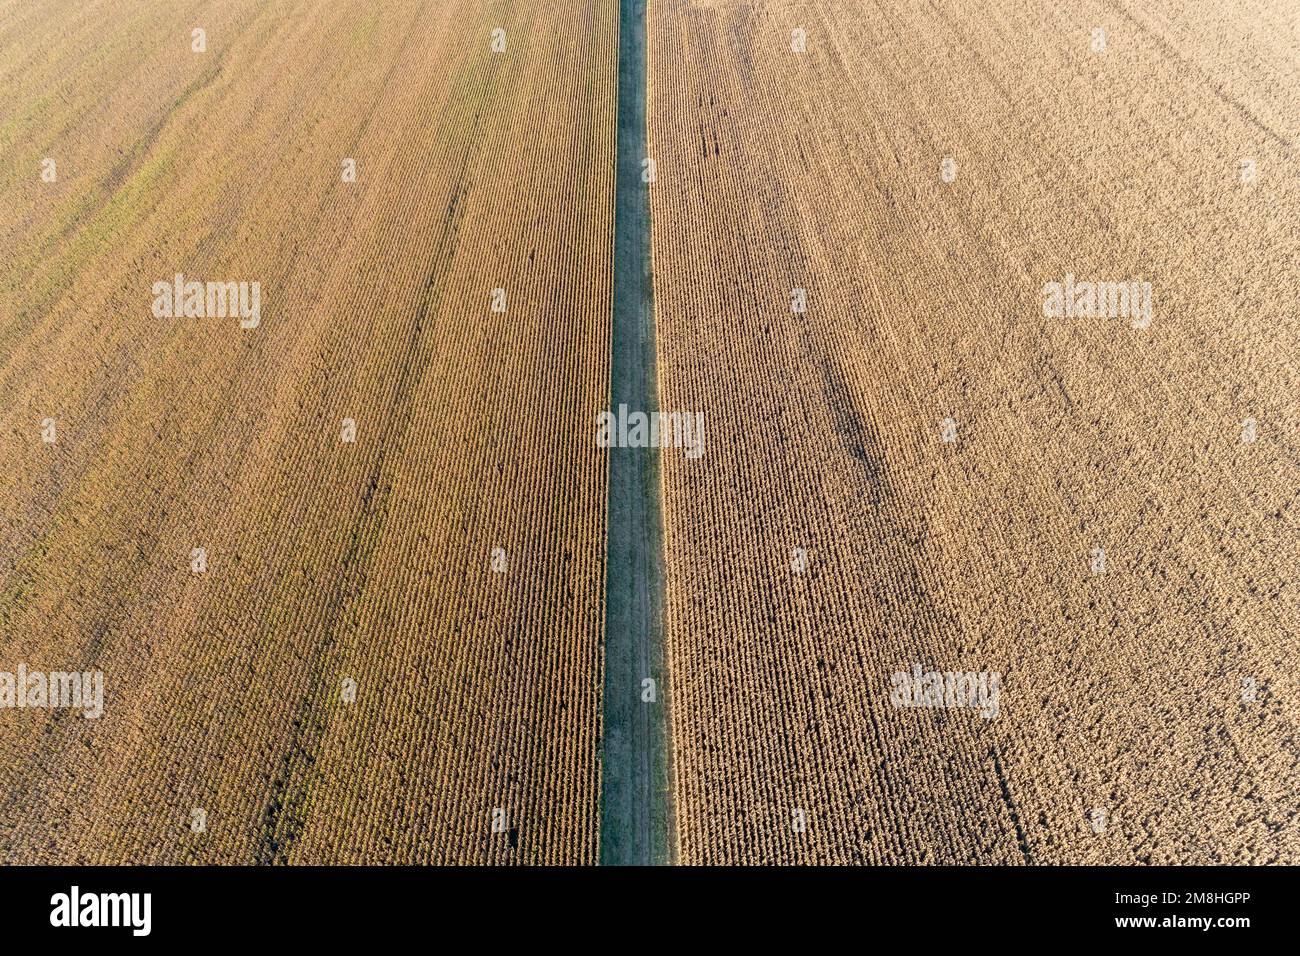 63801-10411 Dividing line between two corn fields before harvest-aerial Marion Co. IL Stock Photo